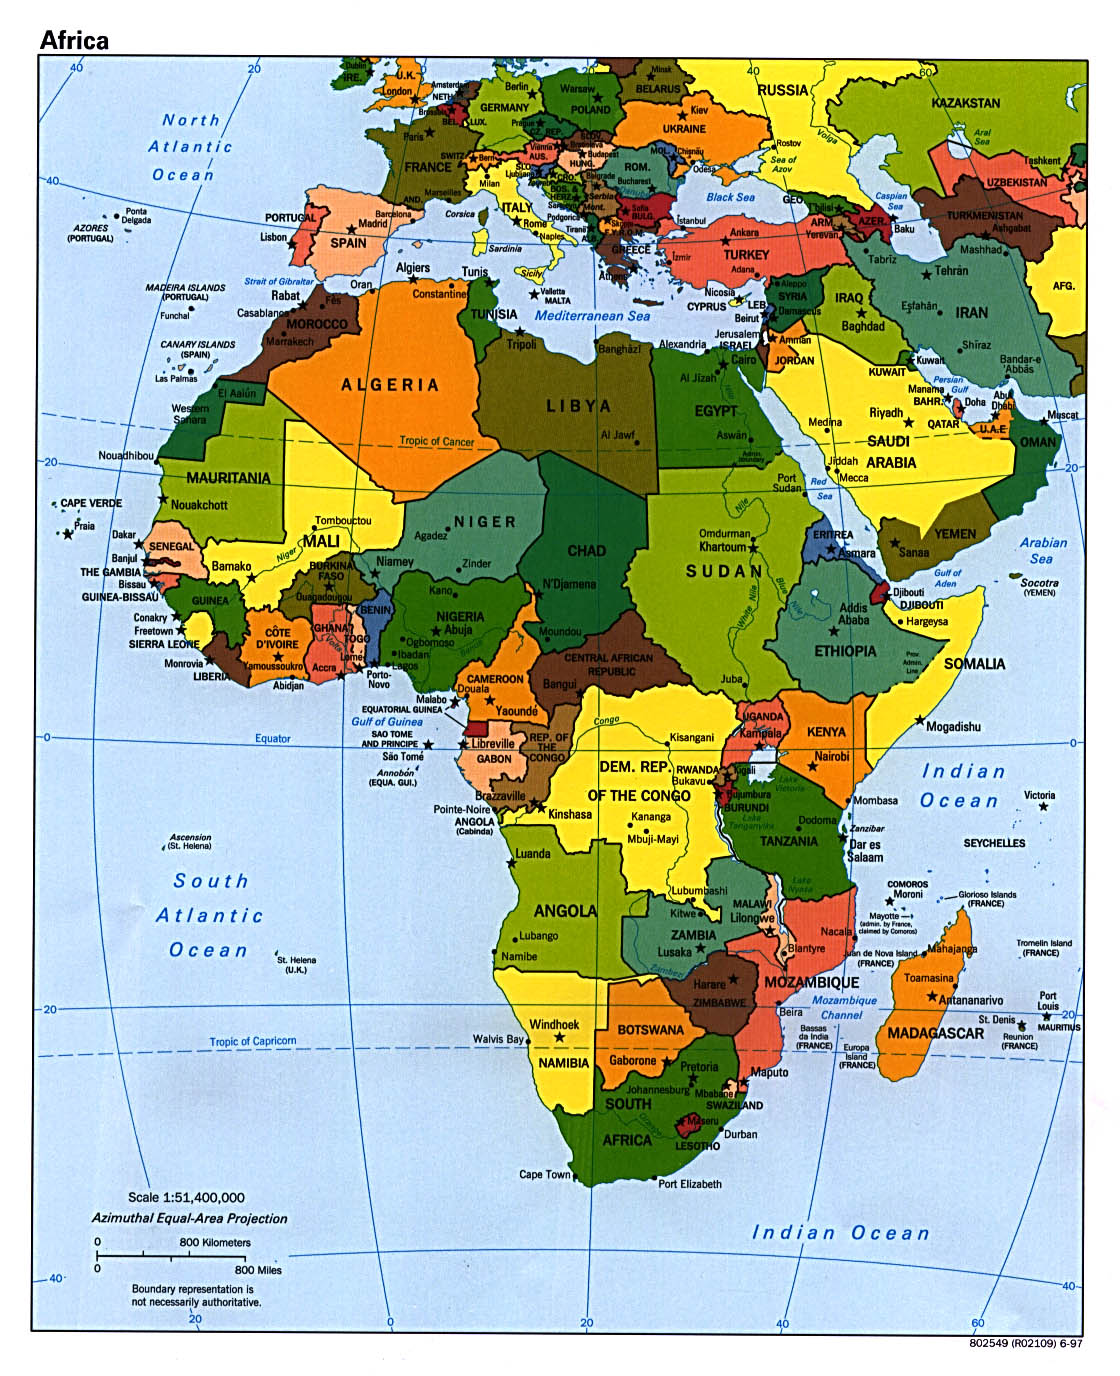 Can you find Sudan on this map? The country has now split into two countries: North Sudan and South Sudan. Kek is from South Sudan.